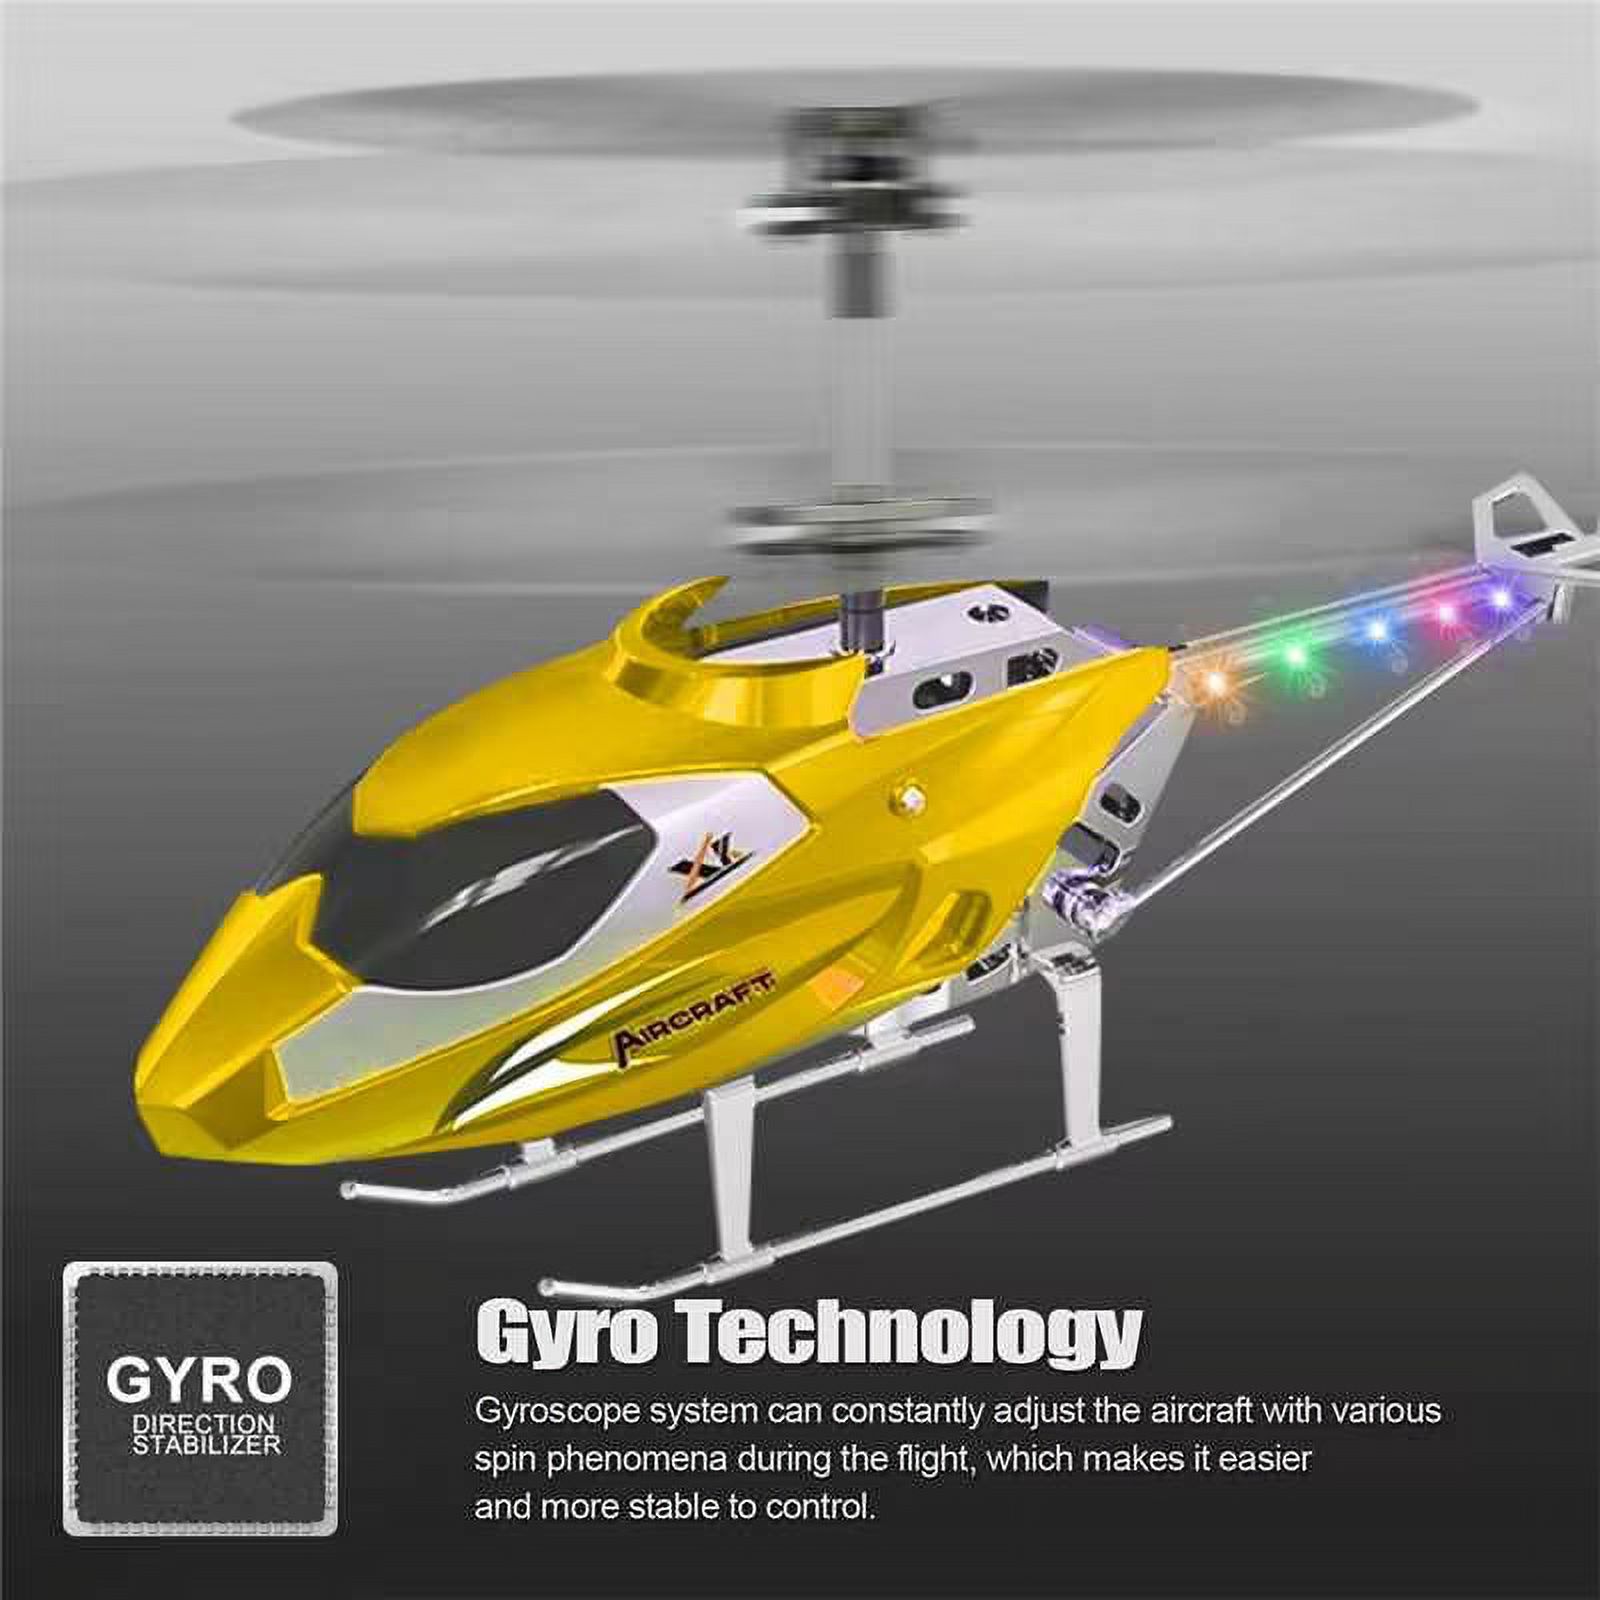 PayUSD Remote Control Helicopter Mini Gyroscope RC Helicopters LED Light for Indoor to Fly for Kids and Beginners, Yellow - image 3 of 8